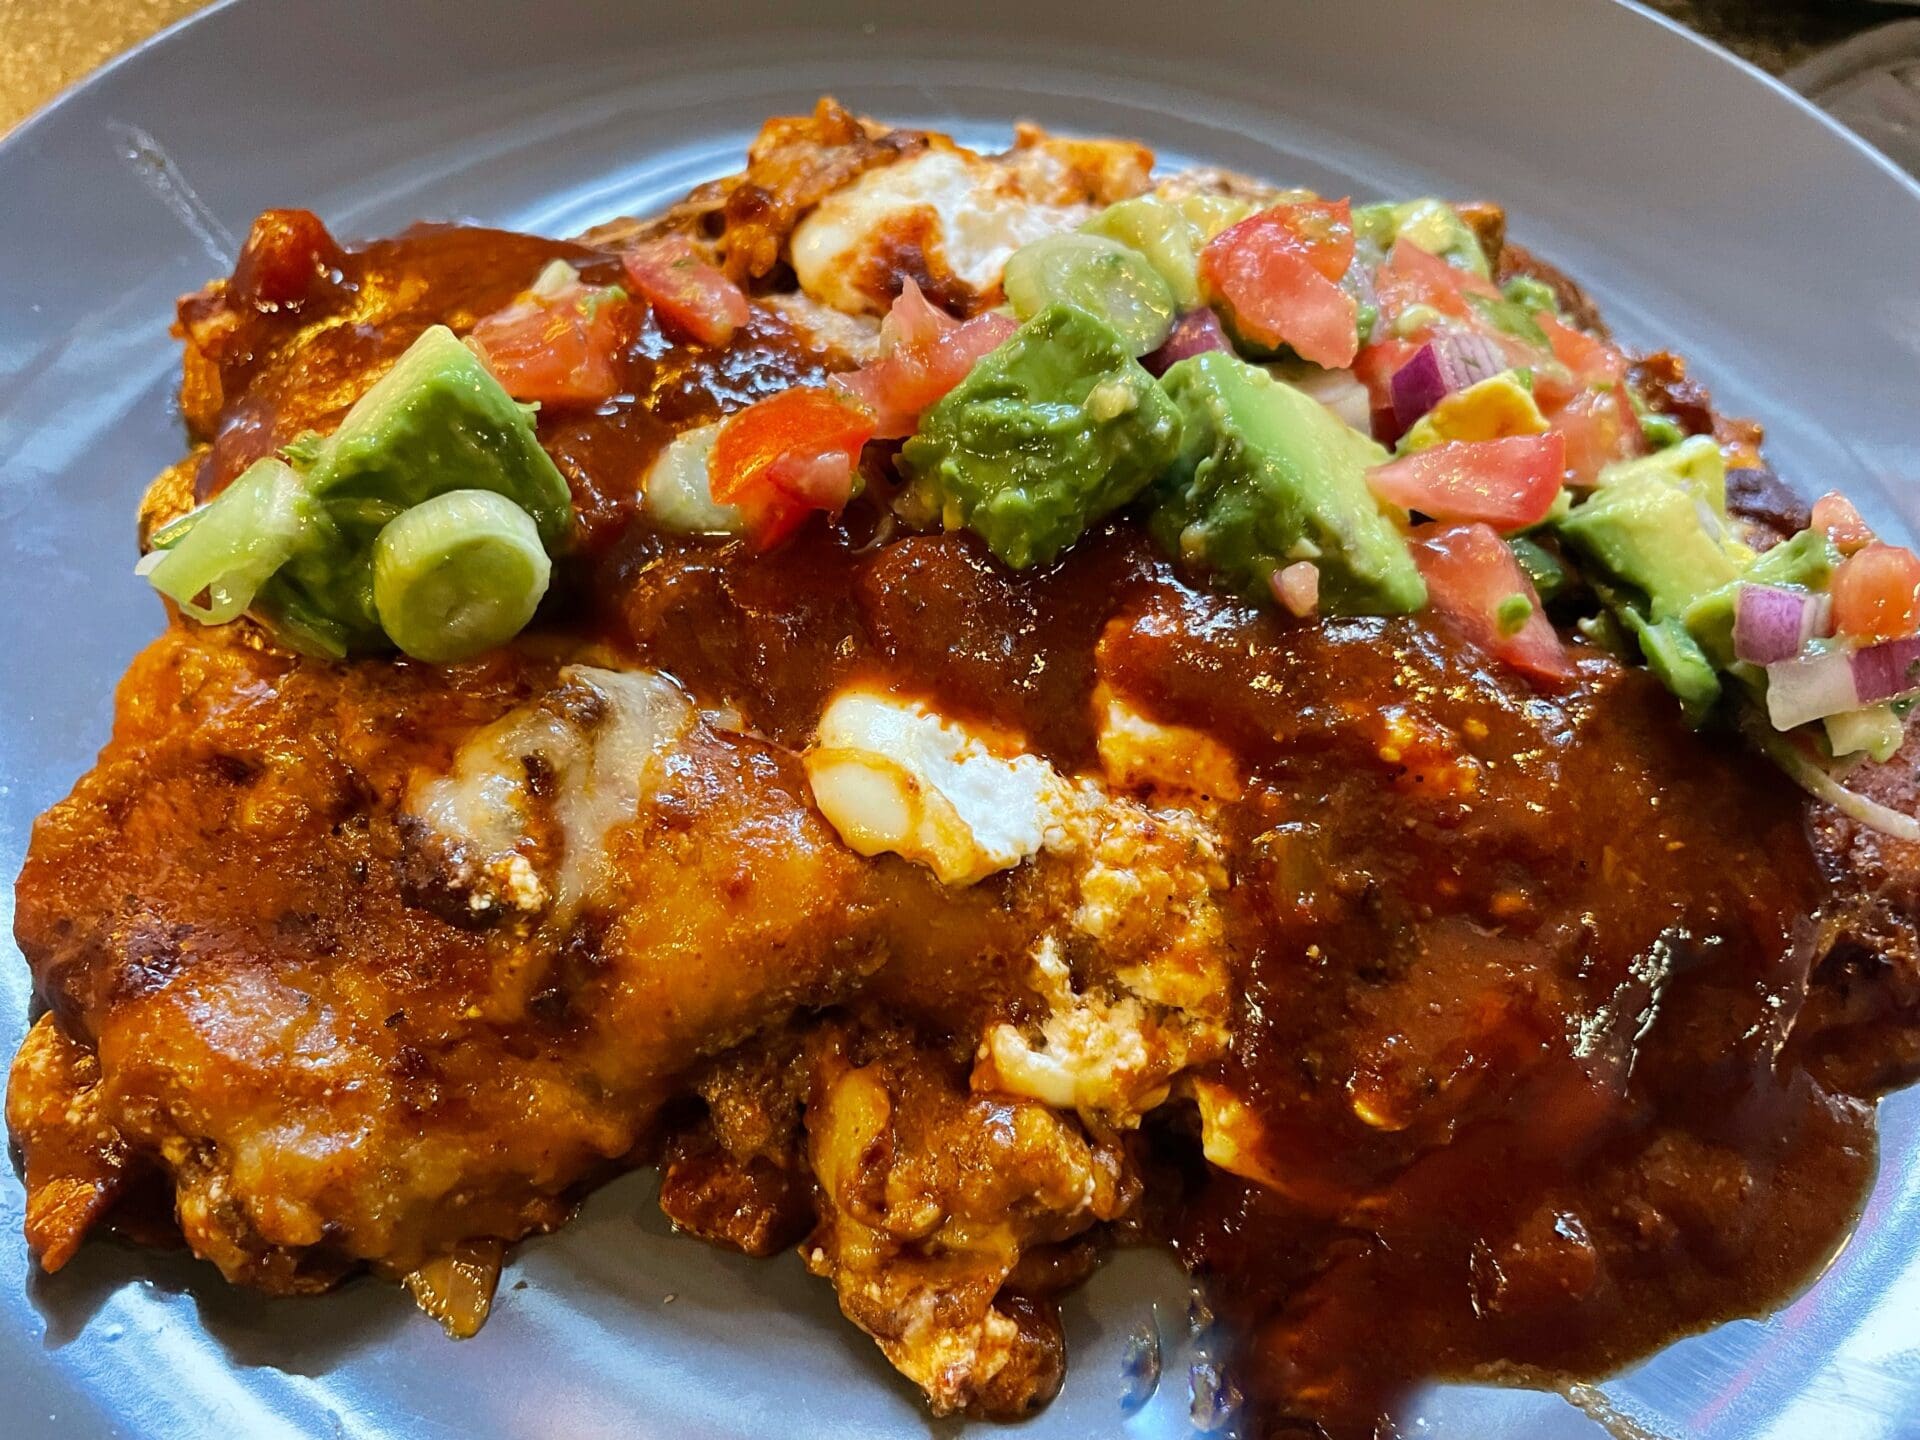 Mexican enchiladas with guacamole on a plate.